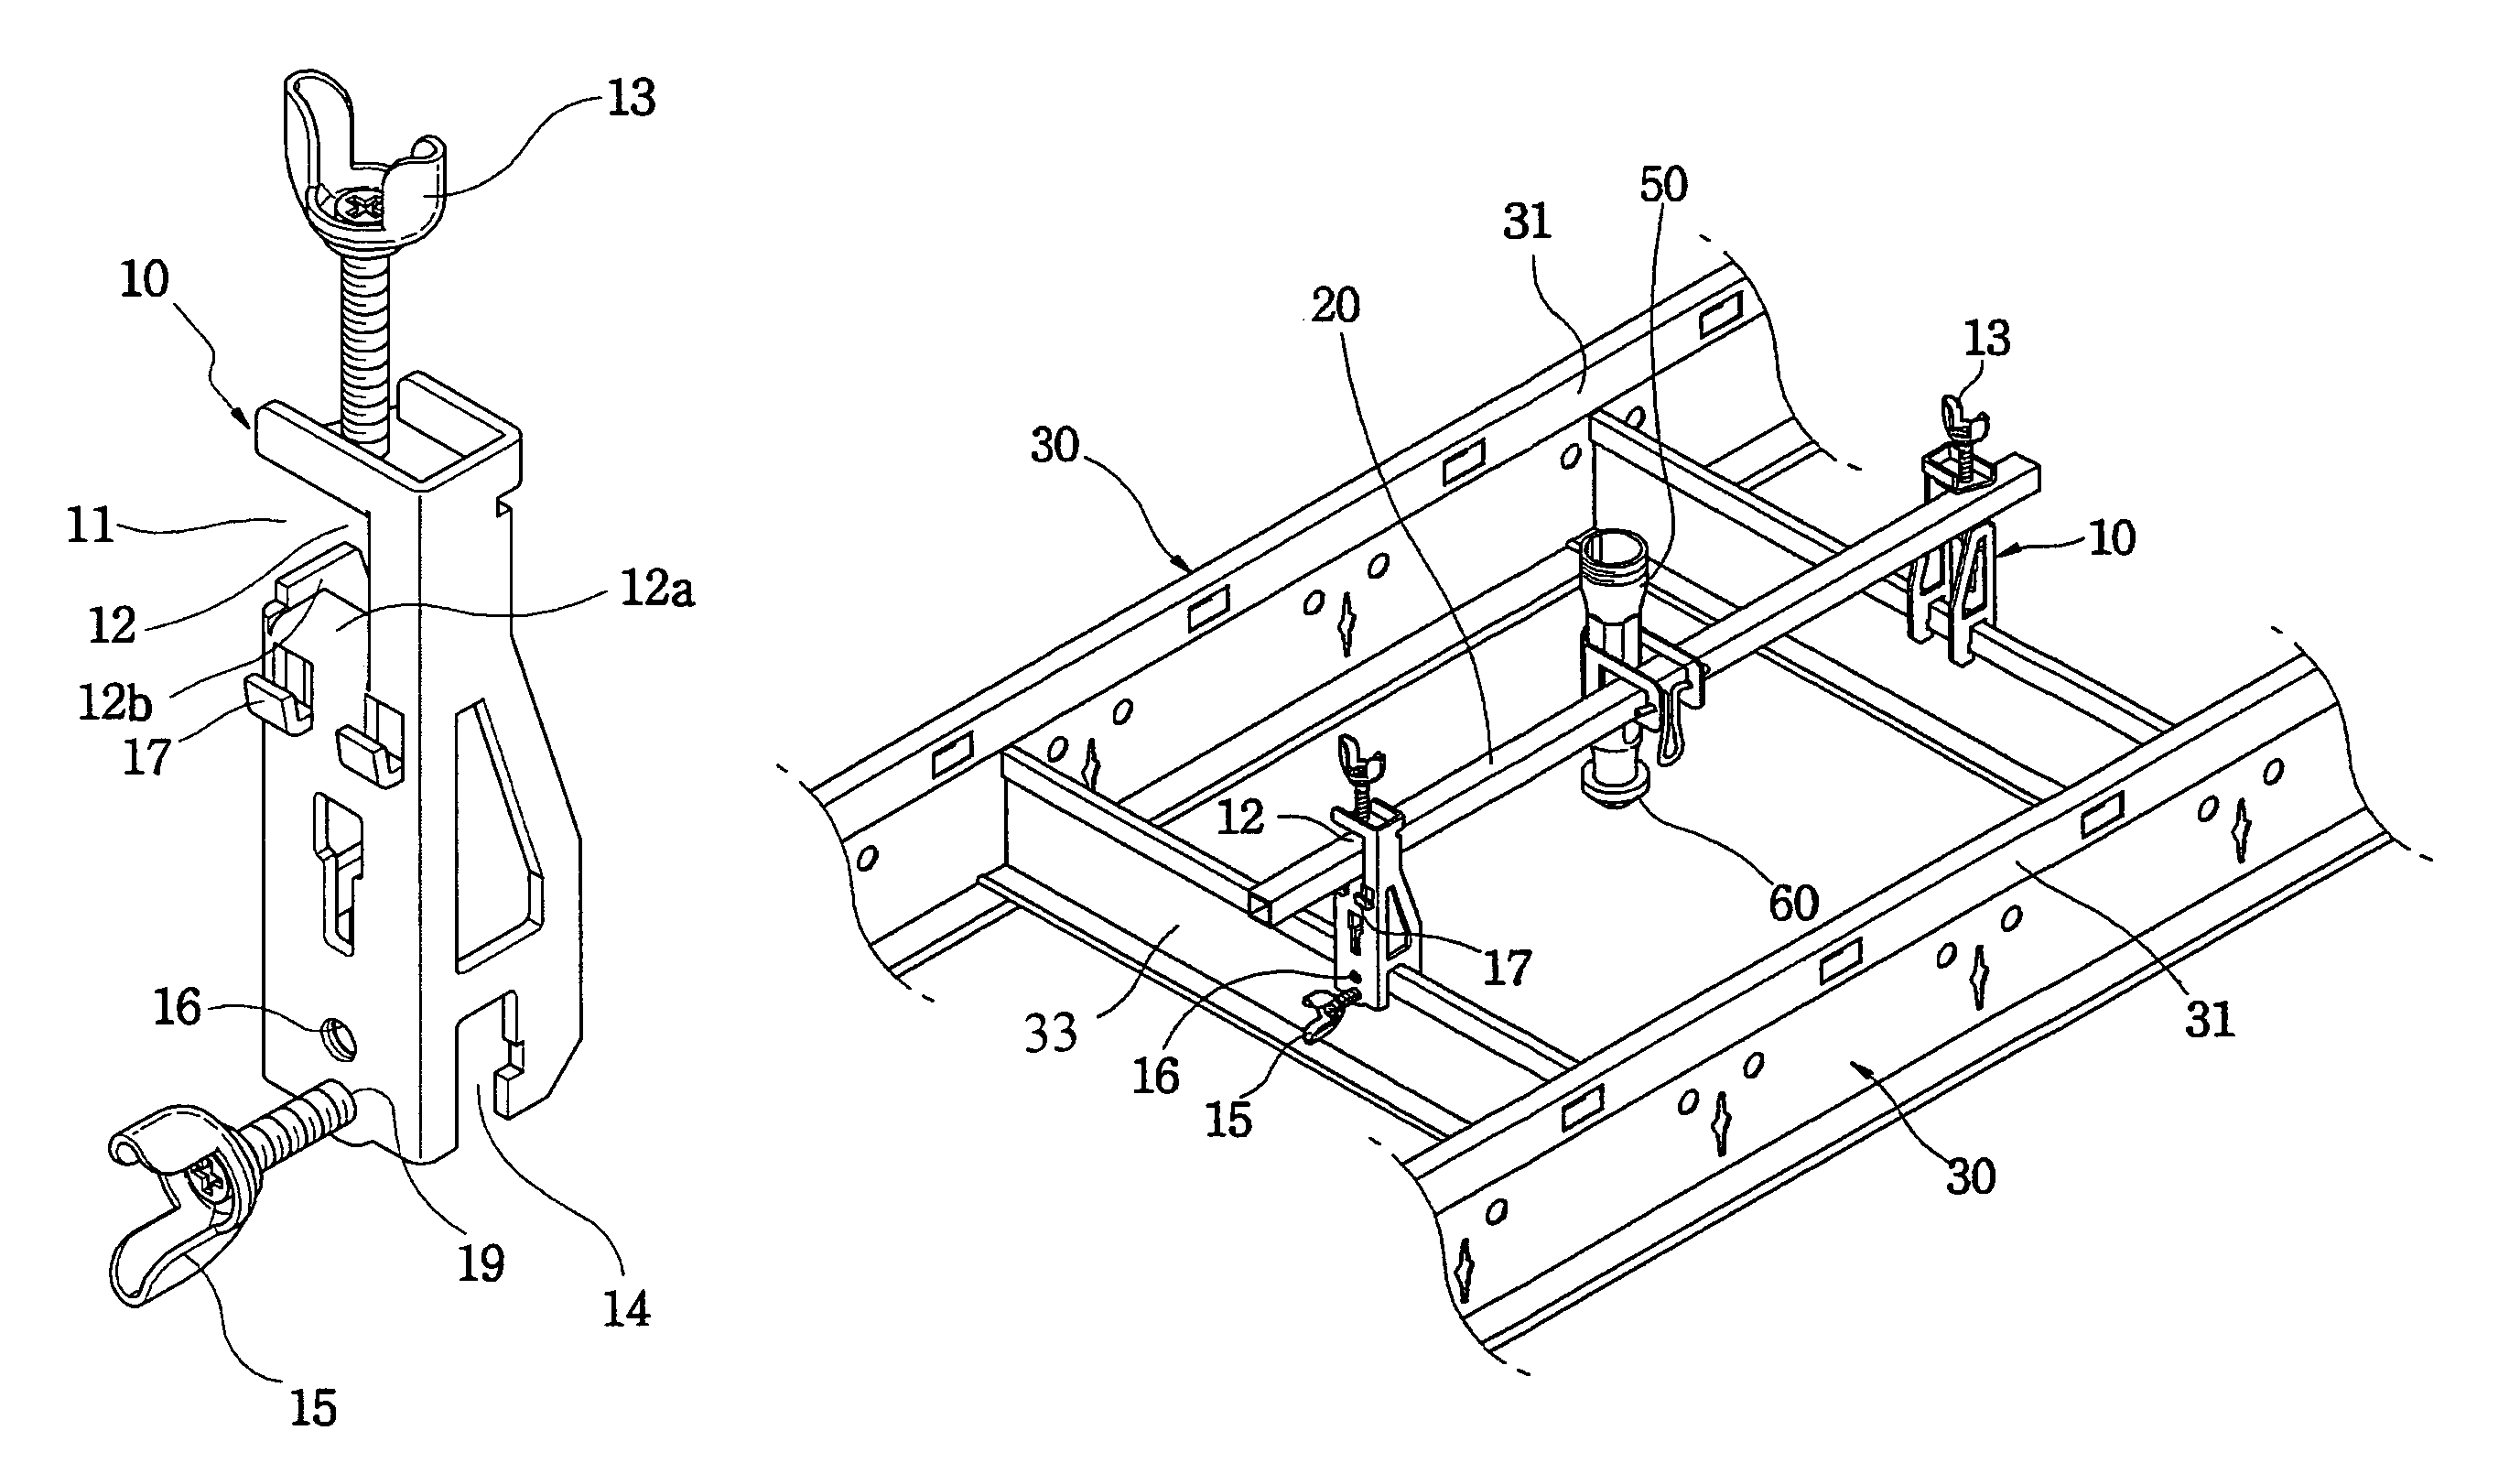 Stock bar and horizontal bar coupling device for mounting sprinkler